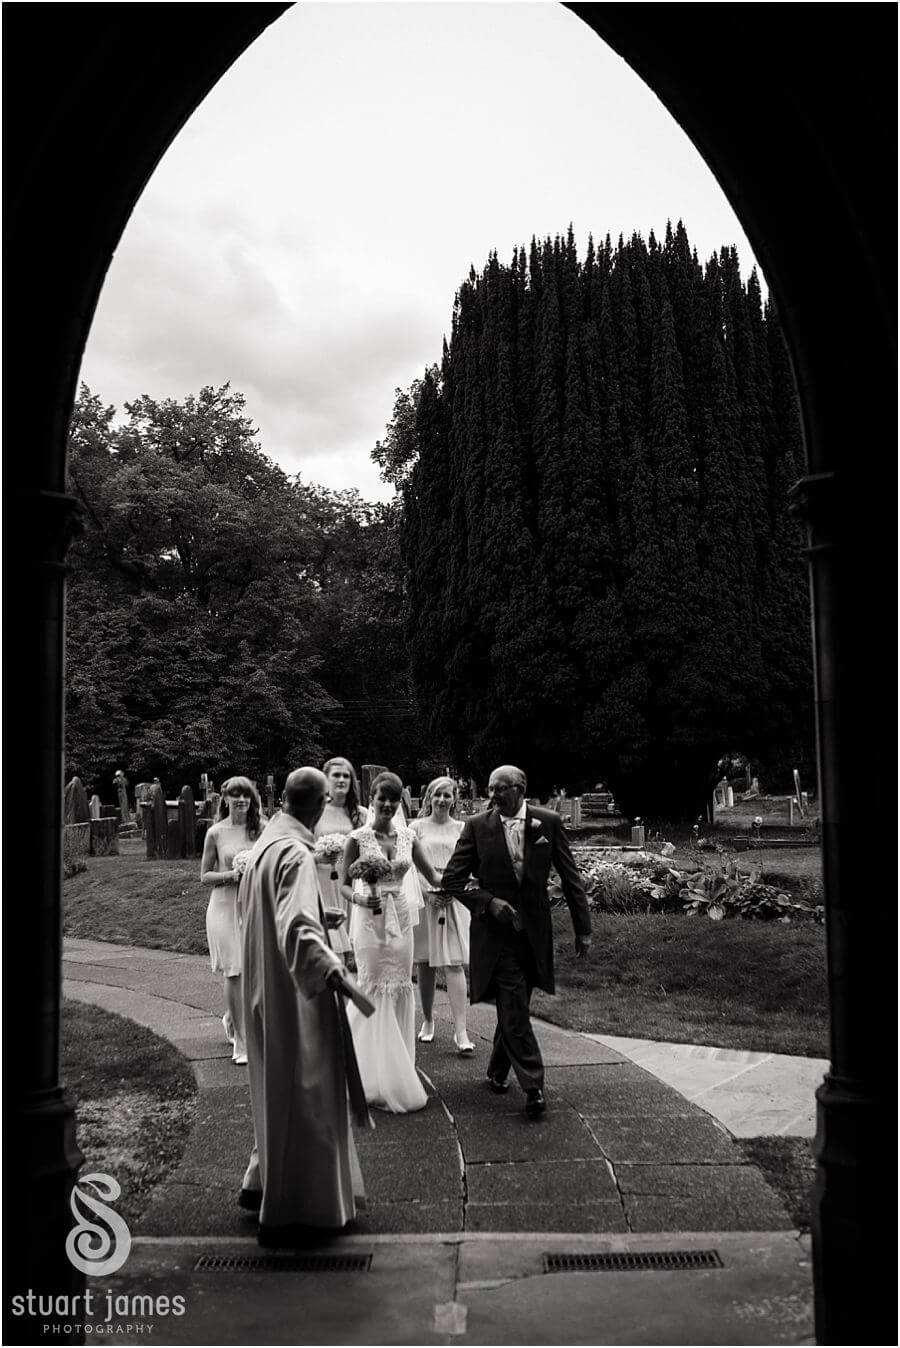 Wedding photography of the arrivals and ceremony at Eccleshall Church near Stafford by Eccleshall Wedding Photographer Stuart James